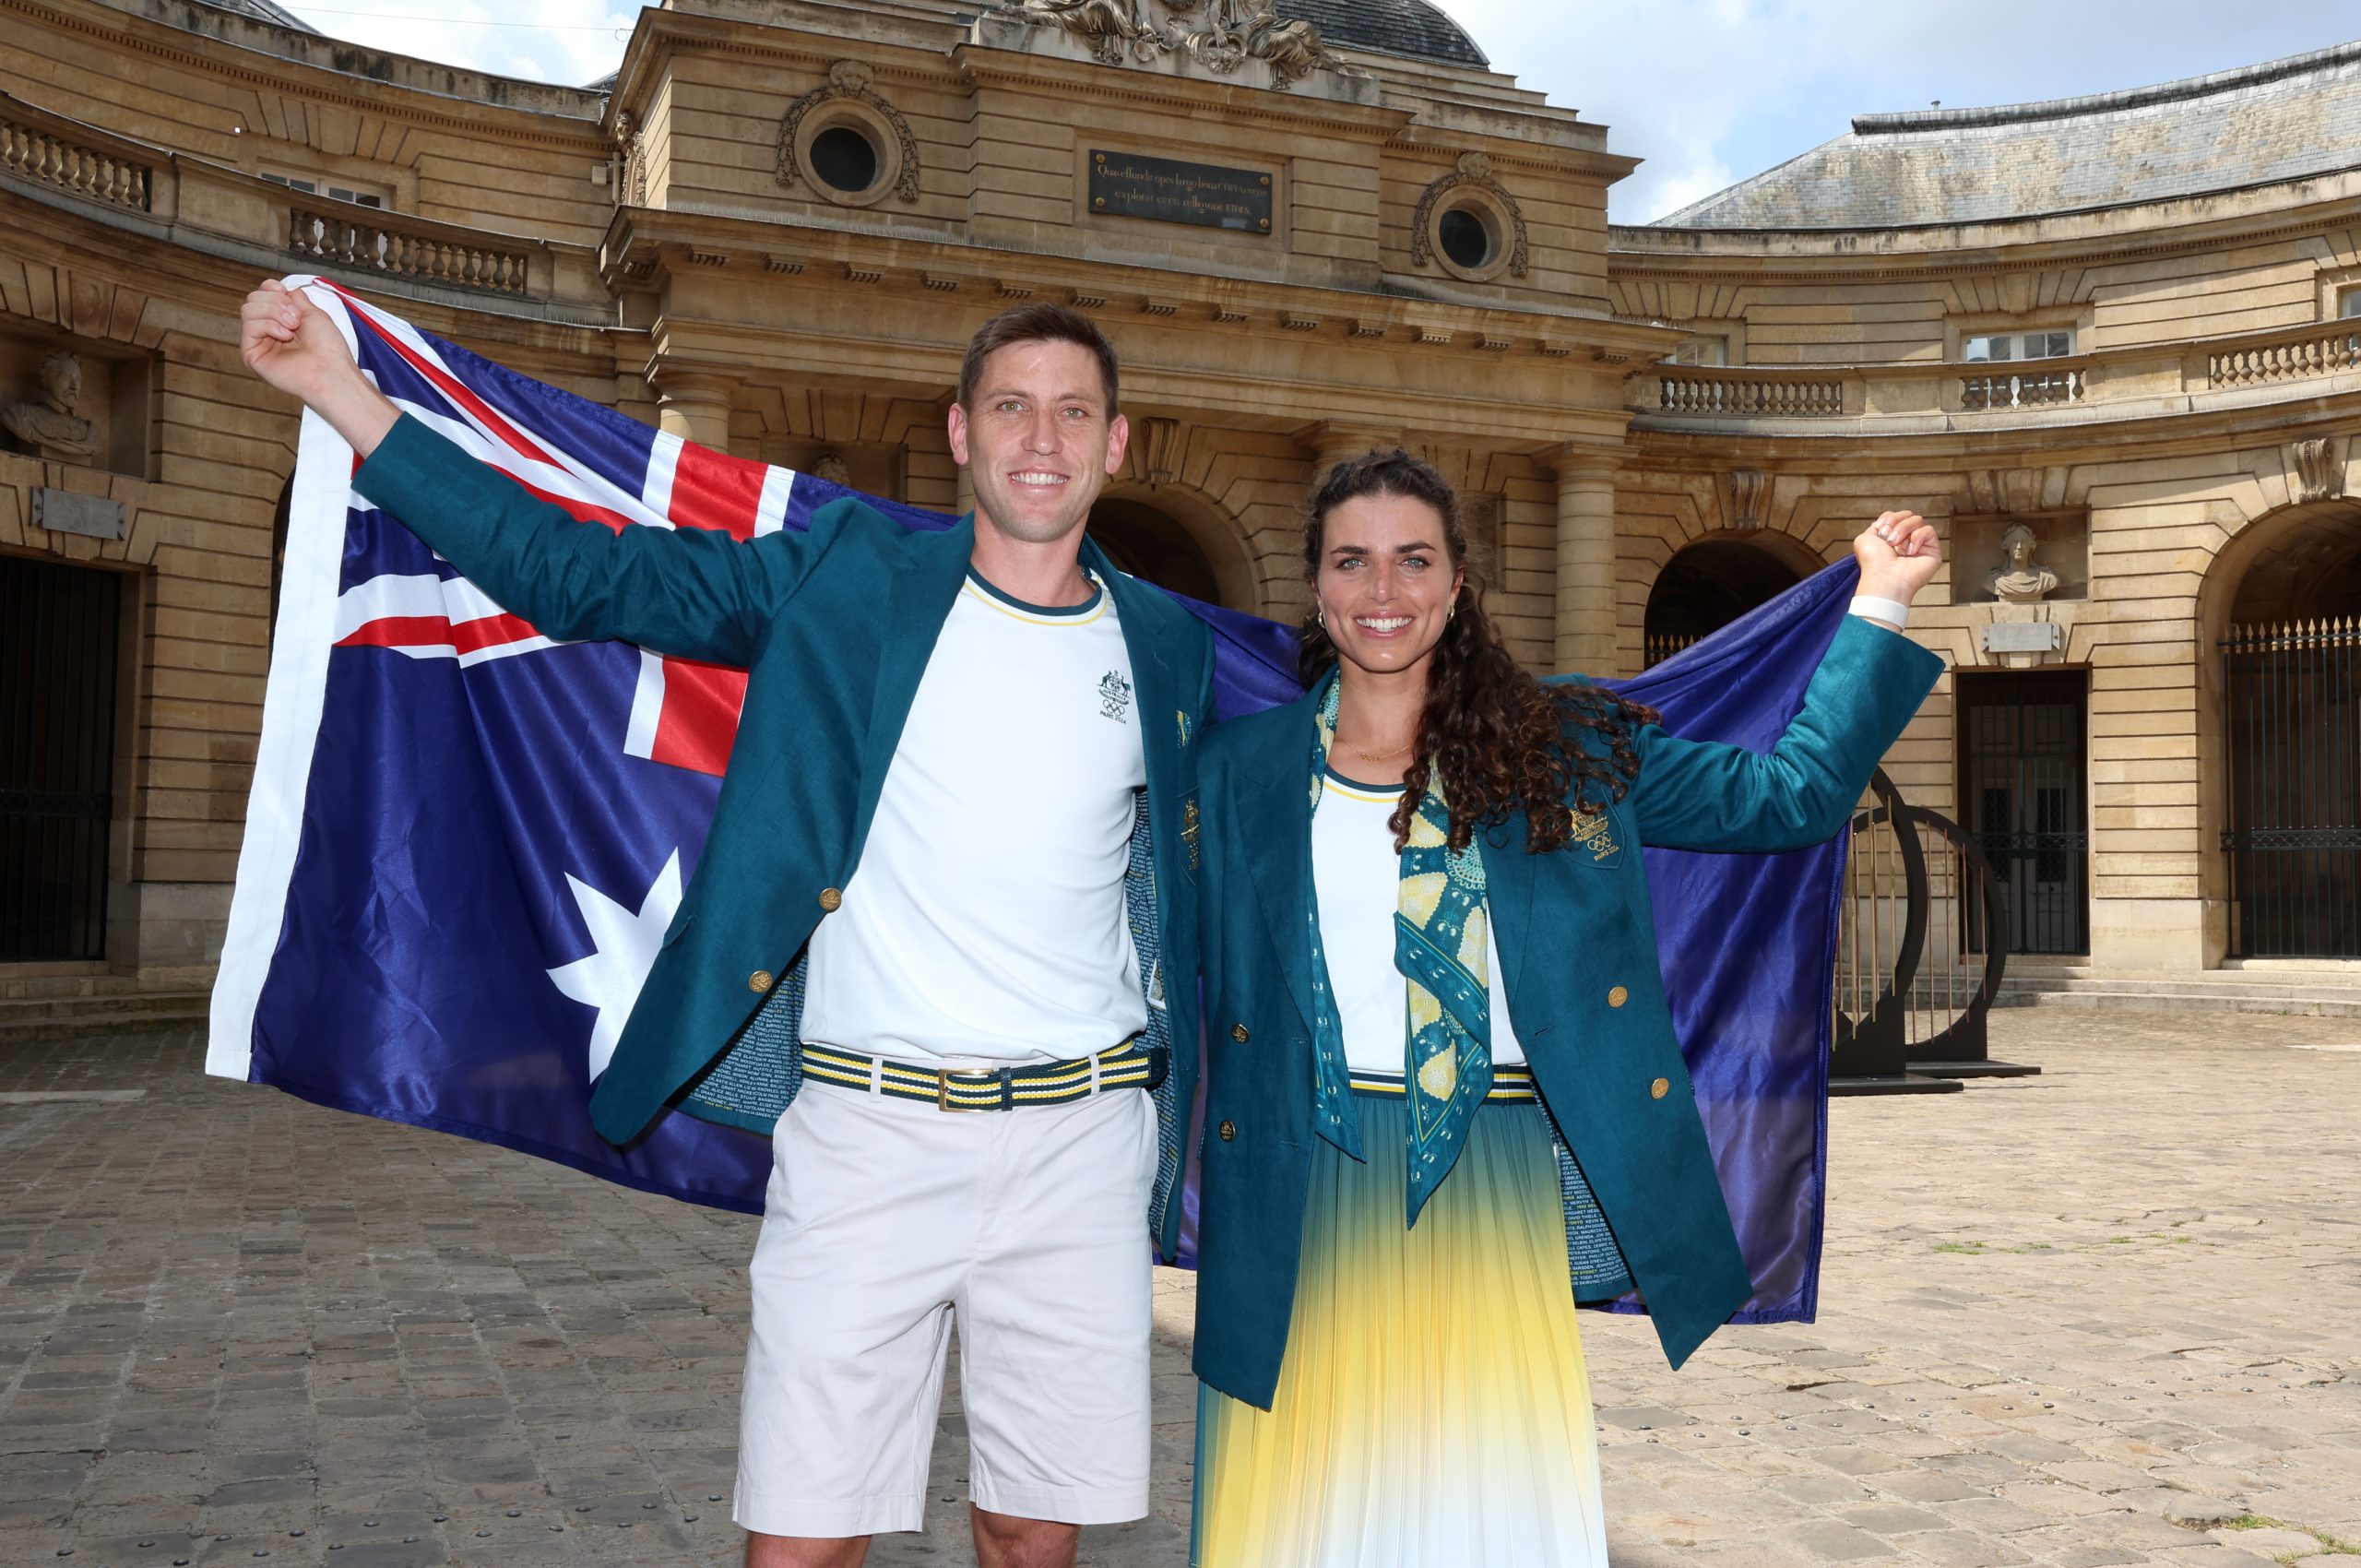 PARIS, FRANCE - JULY 24: (L-R) Eddie Ockenden and Jessica Fox of Team Australia pose with a flag after being named flagbearers ahead of the Paris 2024 Olympic Games on July 24, 2024 in Paris, France. (Photo by Richard Pelham/Getty Images)